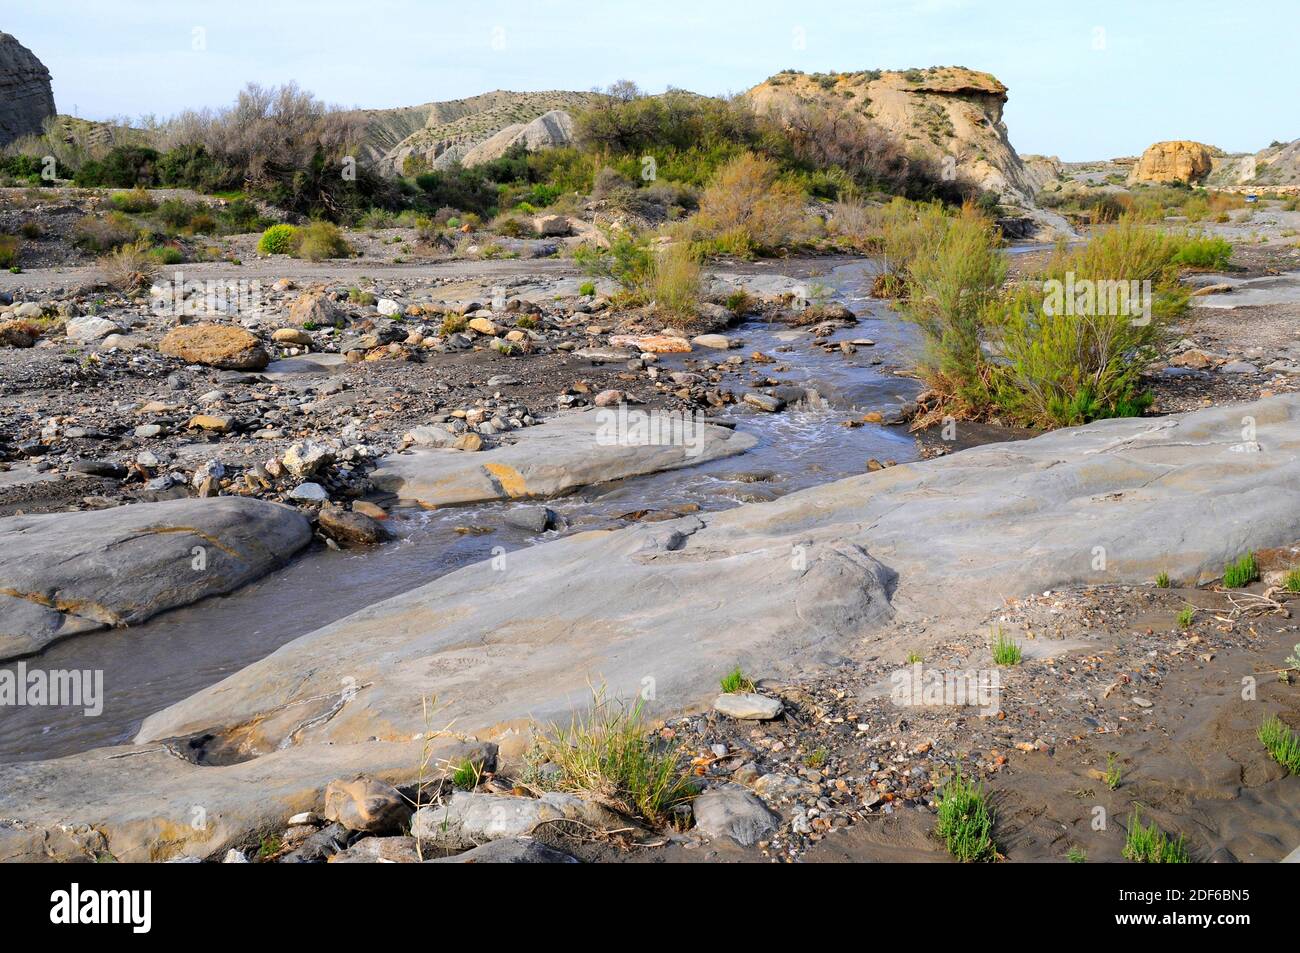 Wadi or rambla is an intermittent stream characteristic of arid climates. This photo was taken in Desierto de Tabernas, Almeria, Andalusia, Spain. Stock Photo